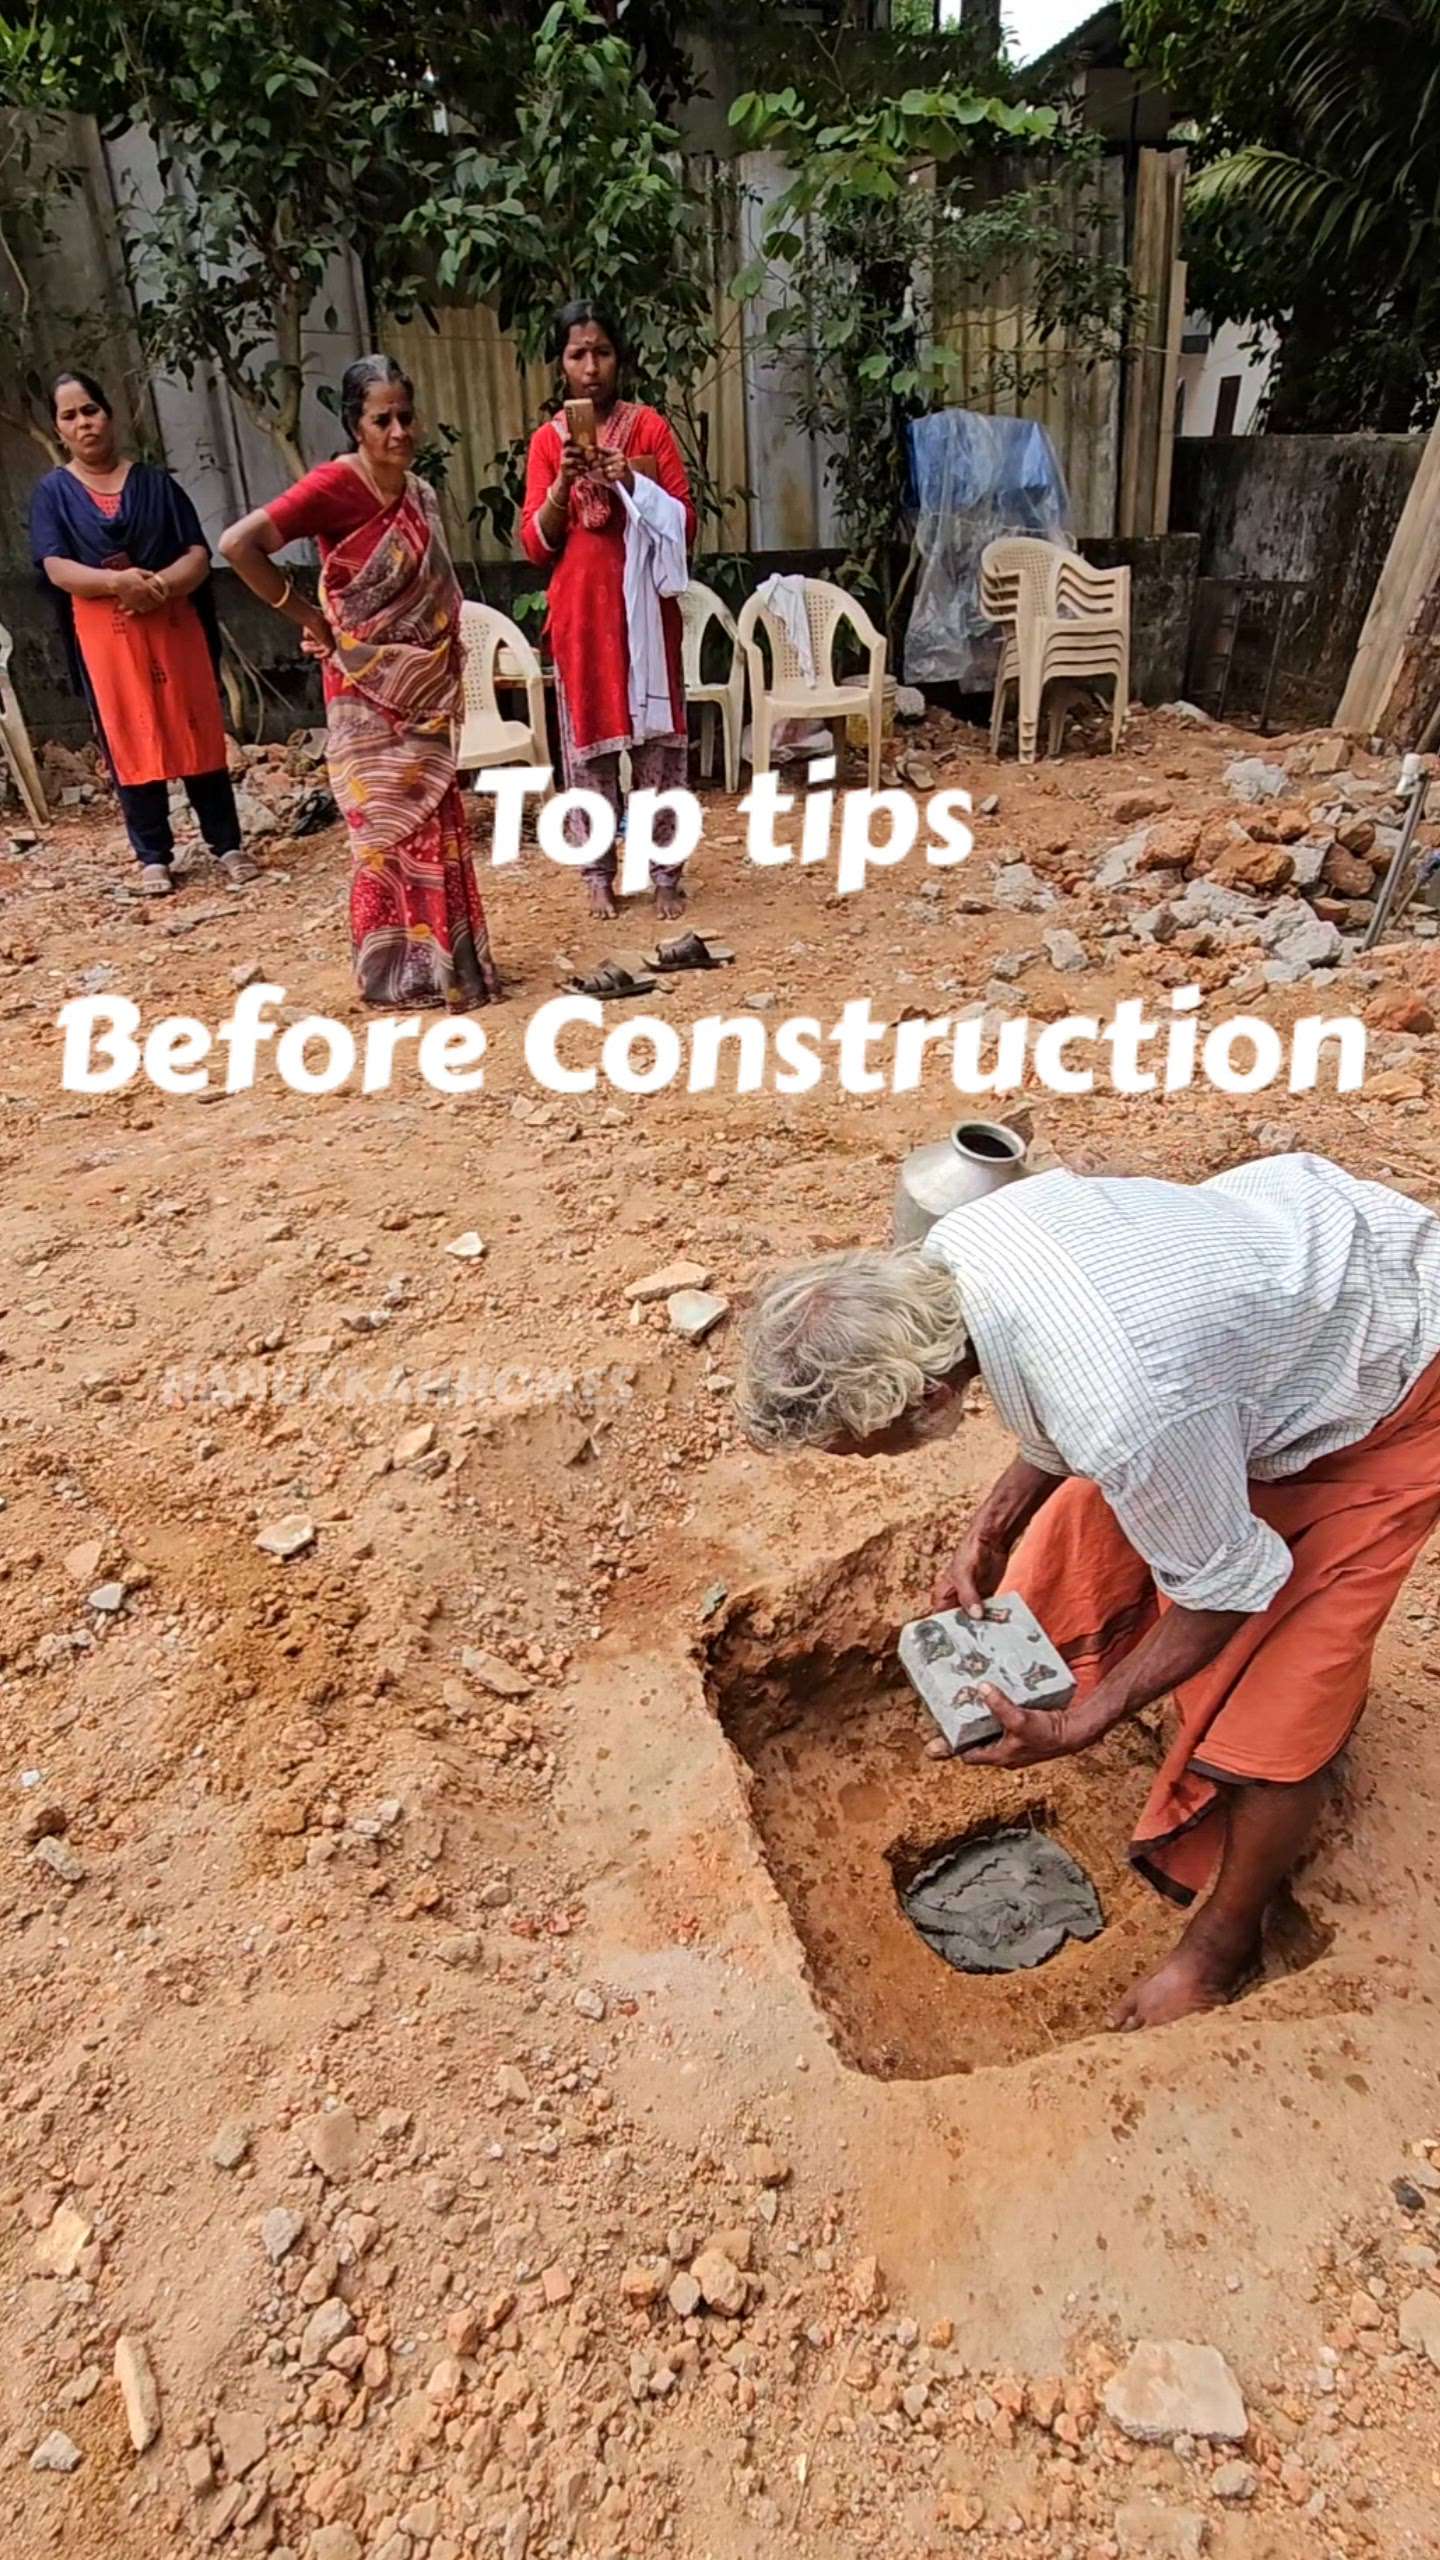 Top tip before house construction
#creatorsofkolo #important #dreamhome #onetip #planning